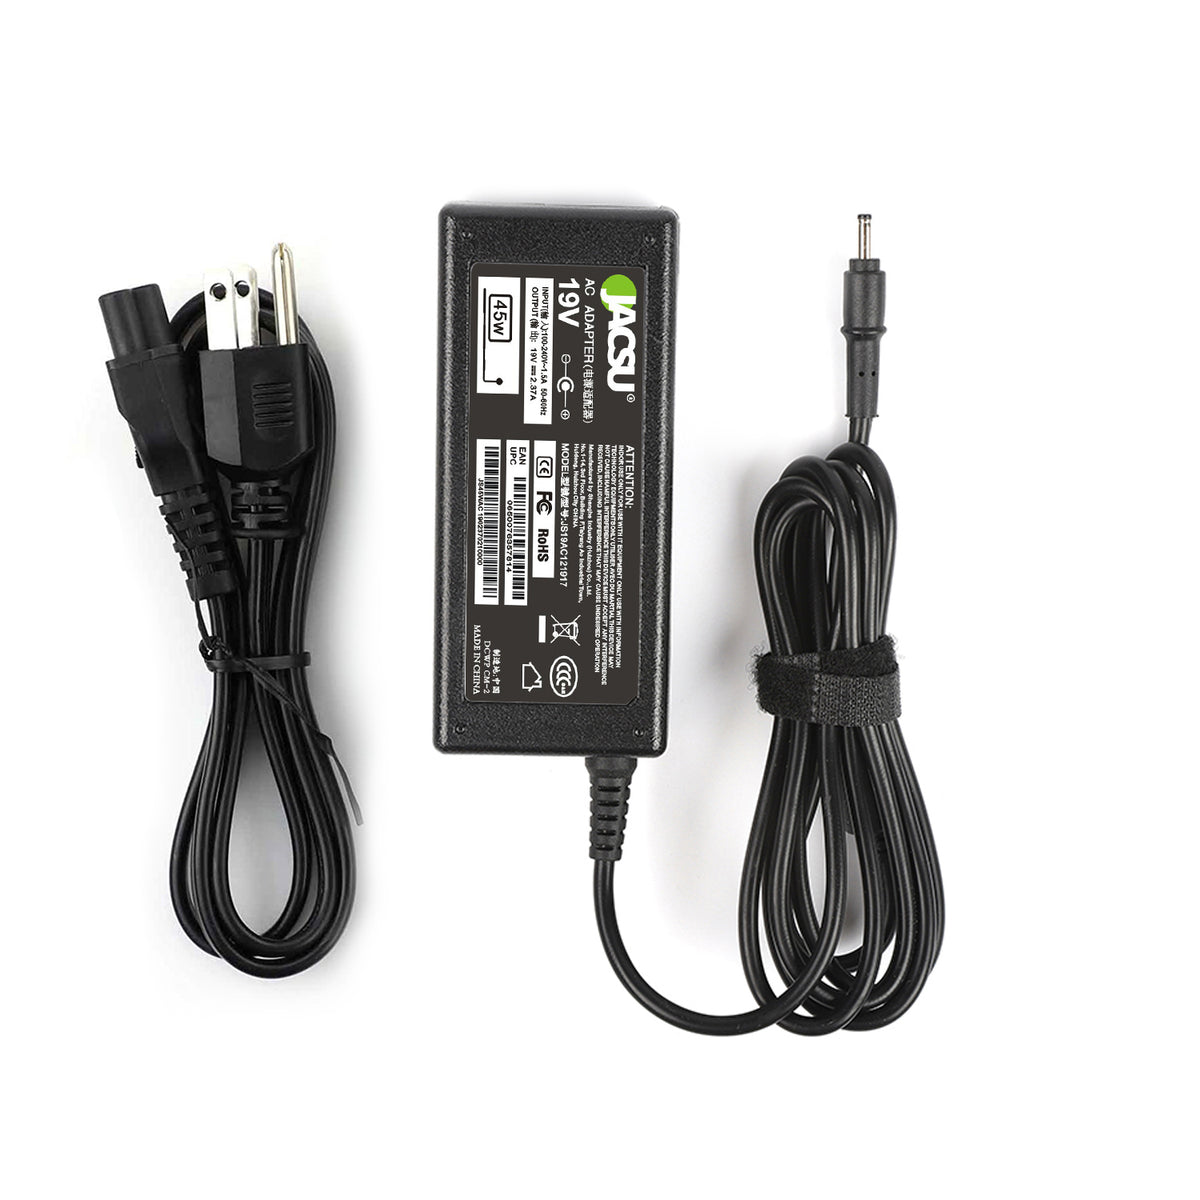 Jacsu 19V 2.37A 45W Pin Size 3.0x1.1 Laptop Ac Power Adapter Charger for Acer Aspire s7 391 V3-371 ES1-512-P84G